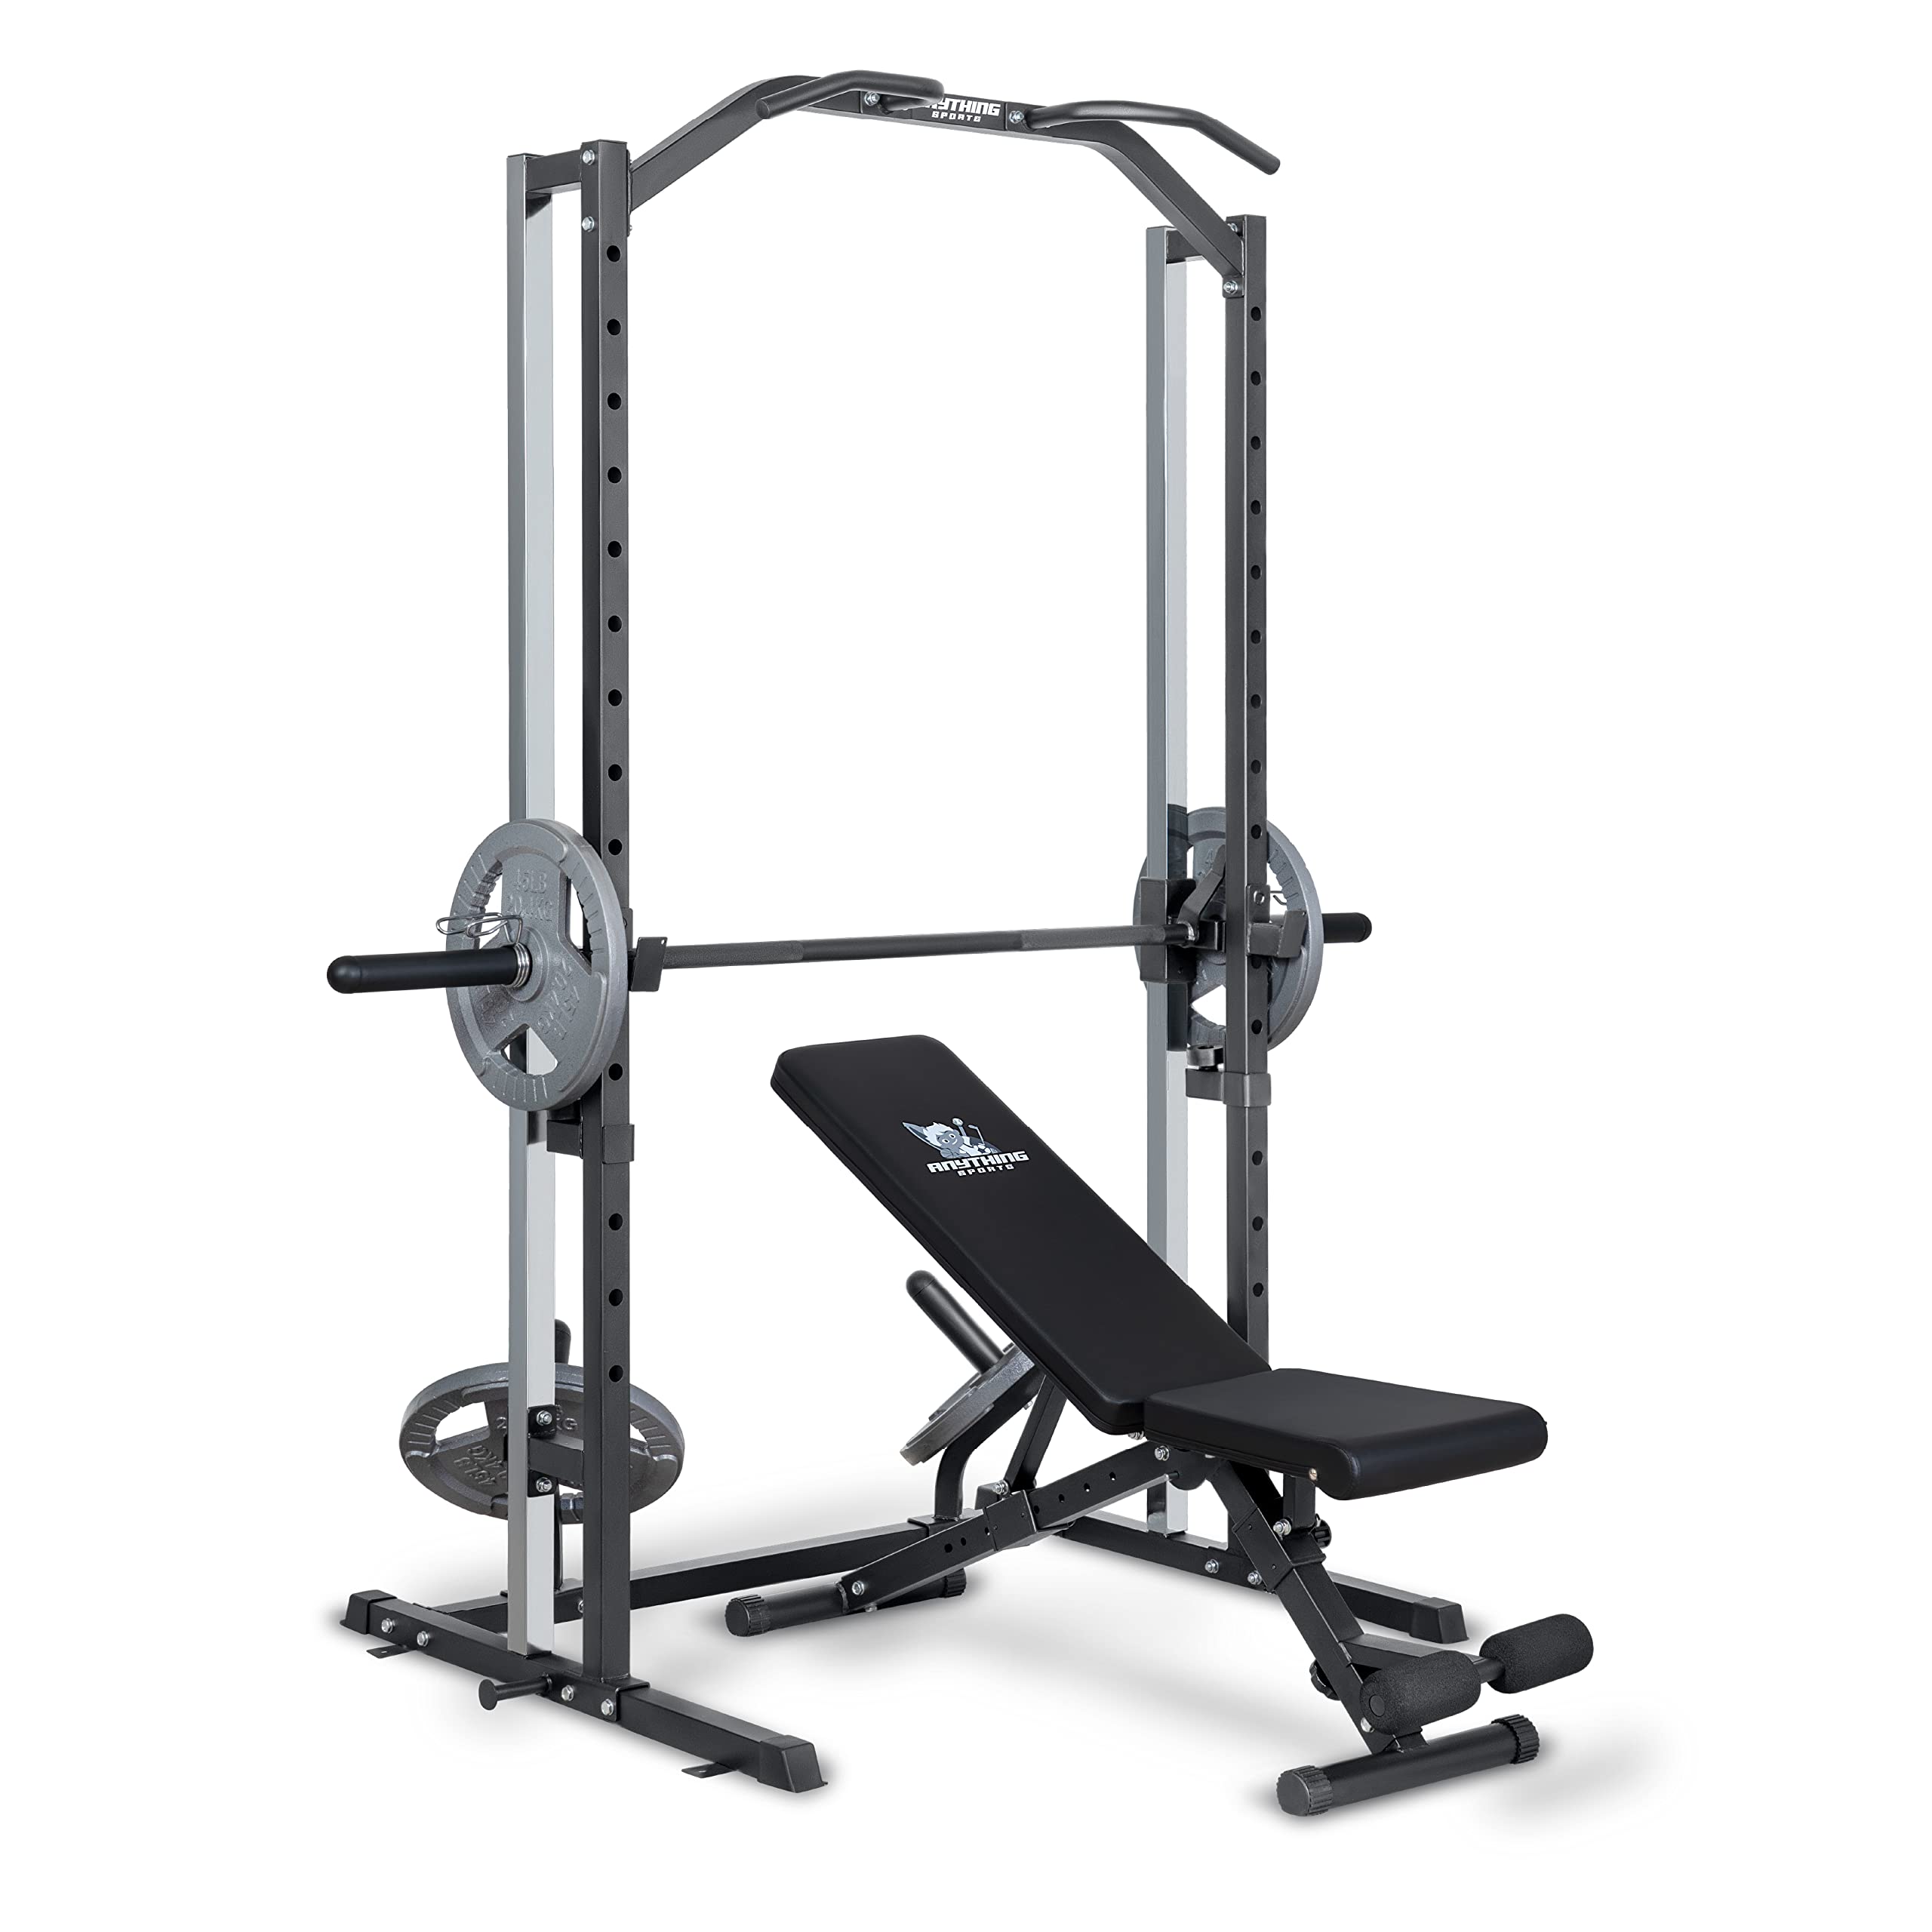 ANYTHINg SPORTS compact Smith Machine with Adjustable Bench